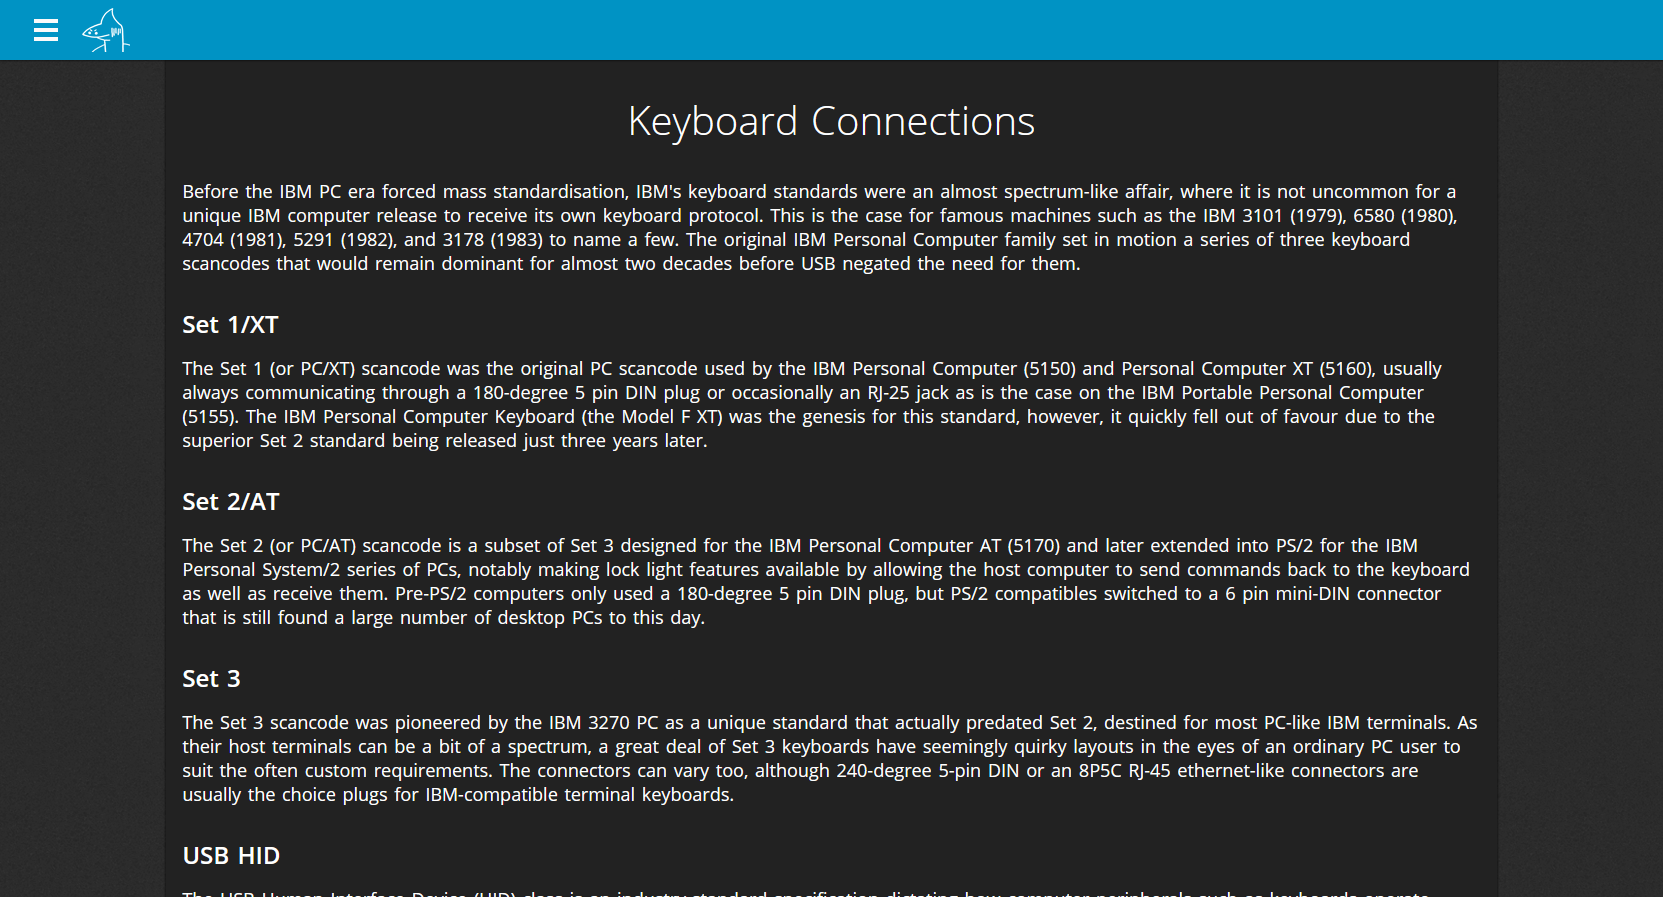 The first draft of the Keyboard Connections topic, build 15th May 2020 (+1 if you can spot the three inaccuracies)